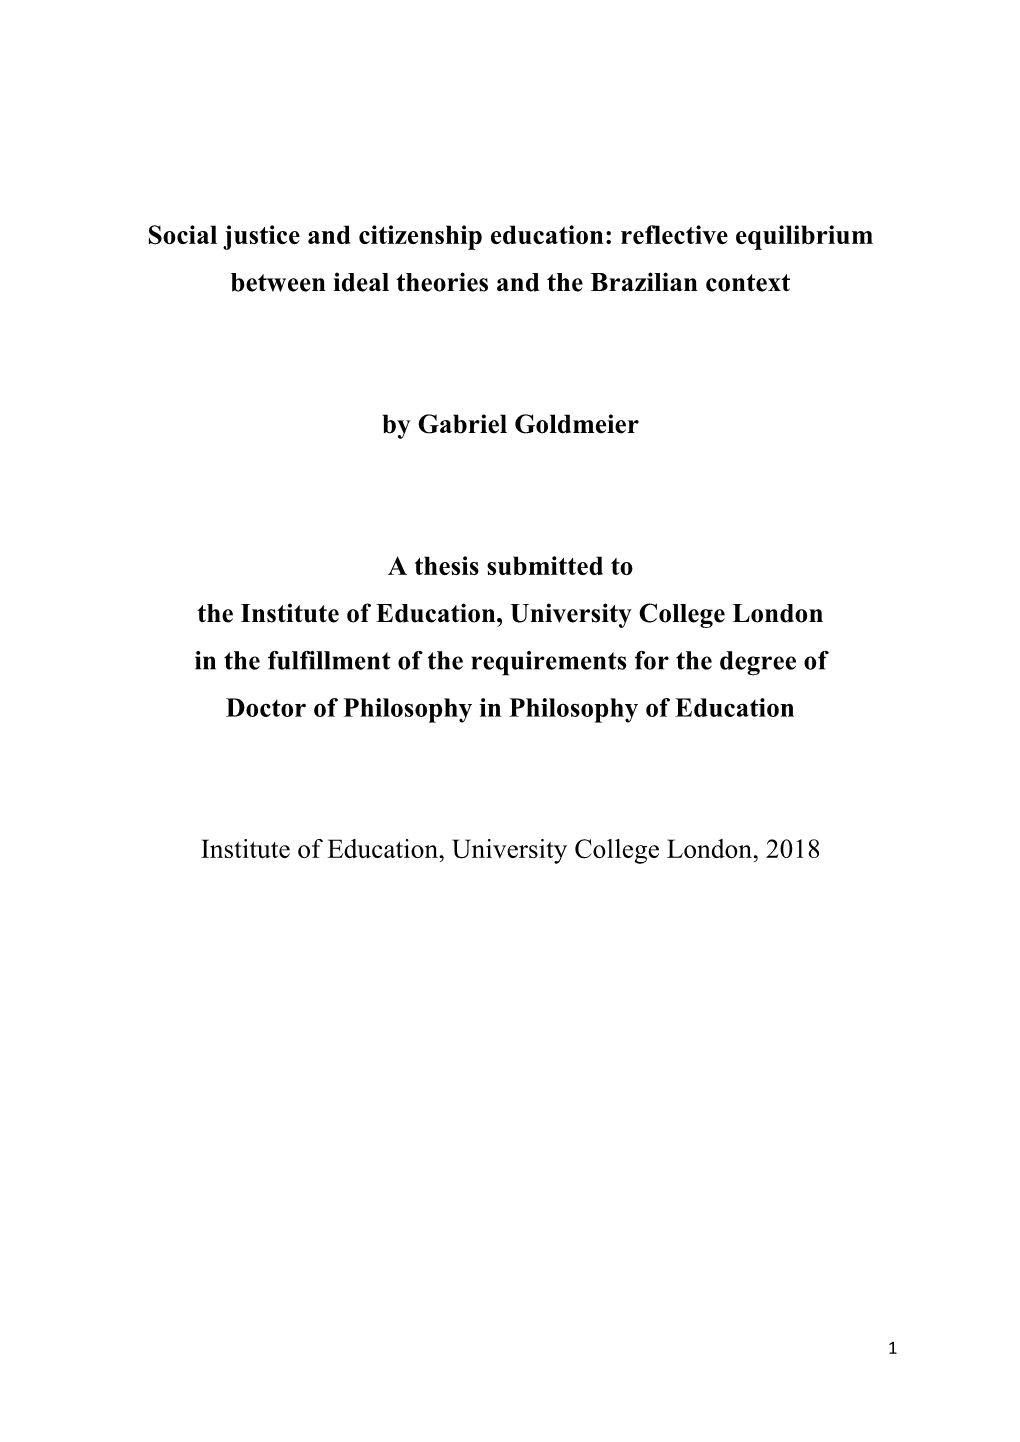 Social Justice and Citizenship Education: Reflective Equilibrium Between Ideal Theories and the Brazilian Context by Gabriel